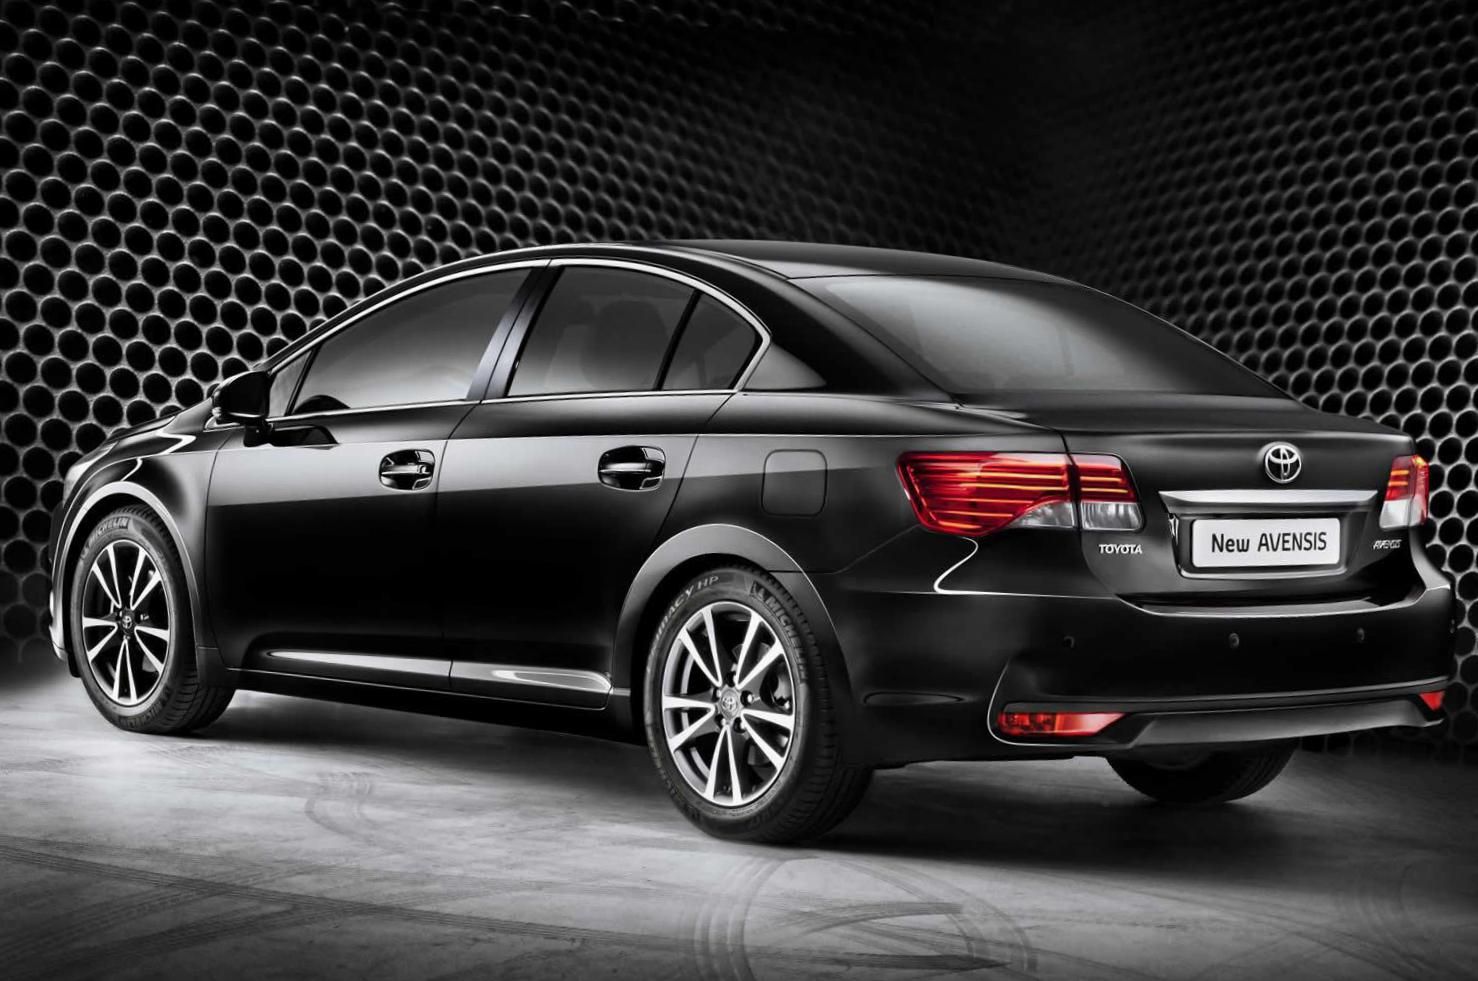 Toyota Avensis Photo and Specs. Photo: Toyota Avensis Characteristics and 25 perfect photo of Toyota Avensis. Toyota avensis, Toyota, Car ford